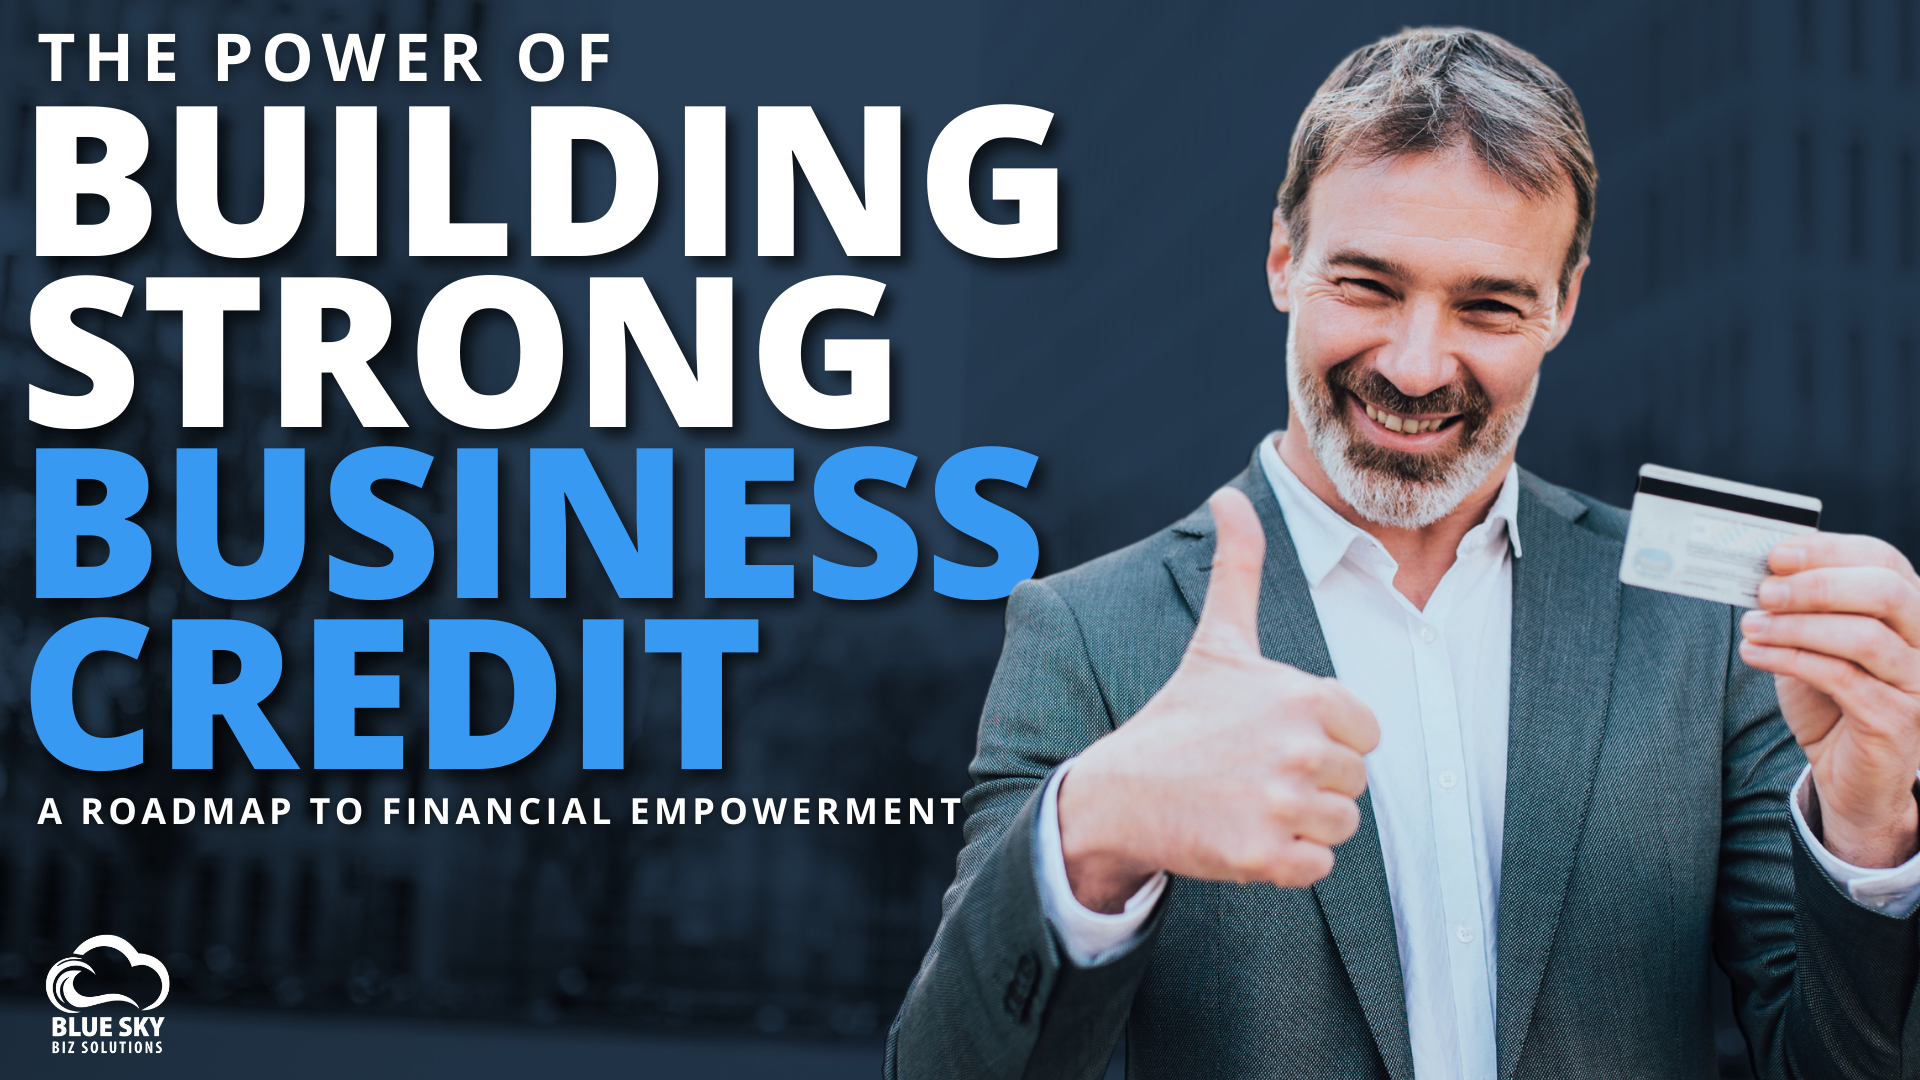 The Power of Building Strong Business Credit: A Roadmap to Financial Empowerment